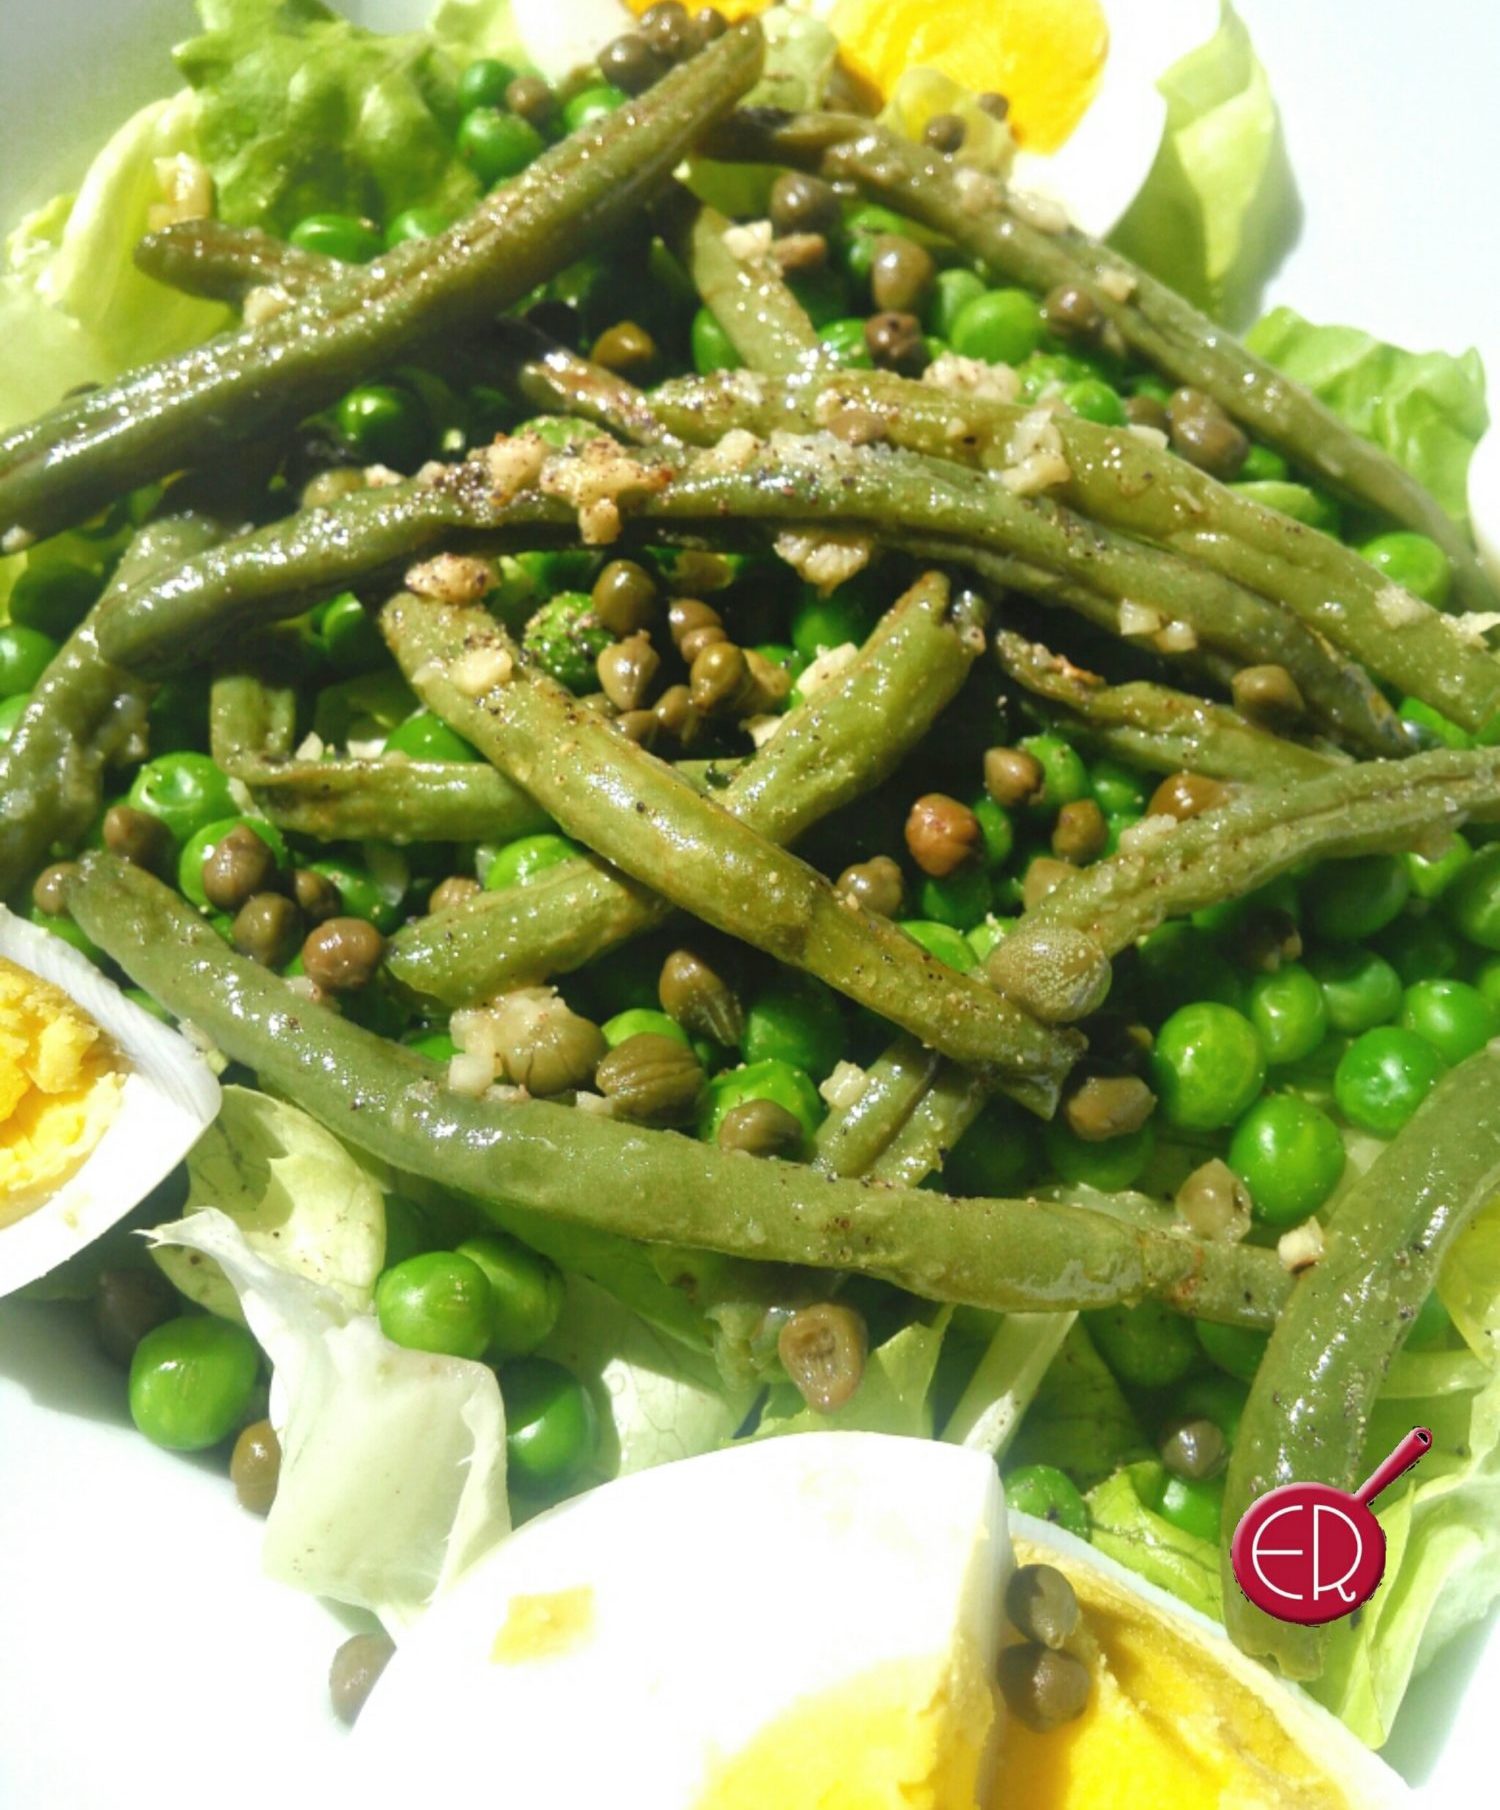 Garlicky Green Beans & Pea Salad with Capers